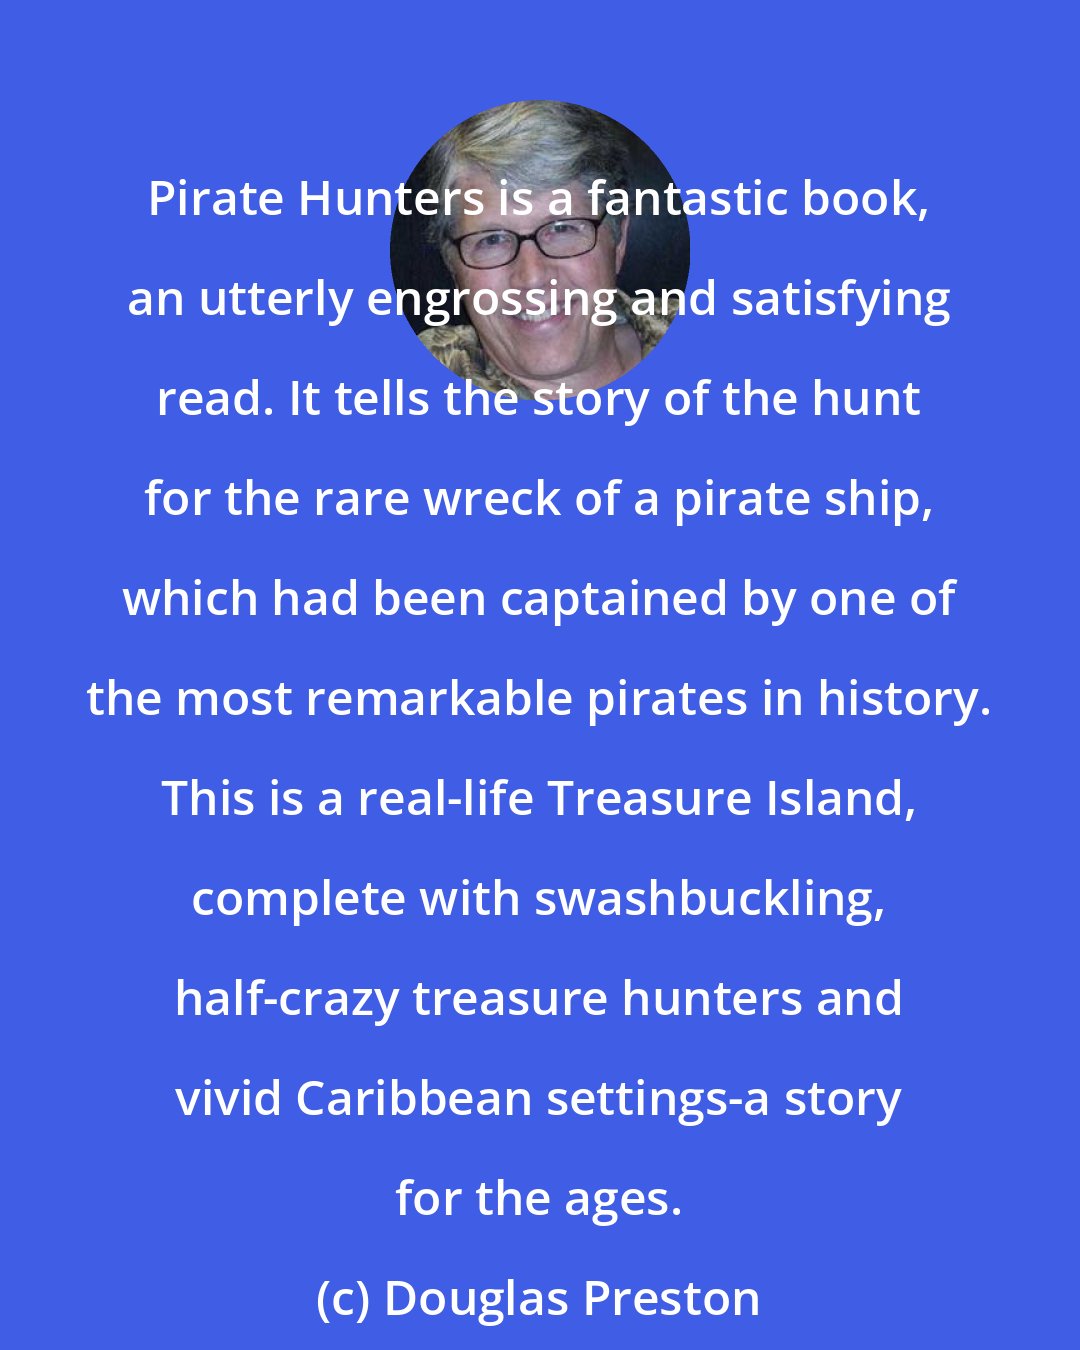 Douglas Preston: Pirate Hunters is a fantastic book, an utterly engrossing and satisfying read. It tells the story of the hunt for the rare wreck of a pirate ship, which had been captained by one of the most remarkable pirates in history. This is a real-life Treasure Island, complete with swashbuckling, half-crazy treasure hunters and vivid Caribbean settings-a story for the ages.